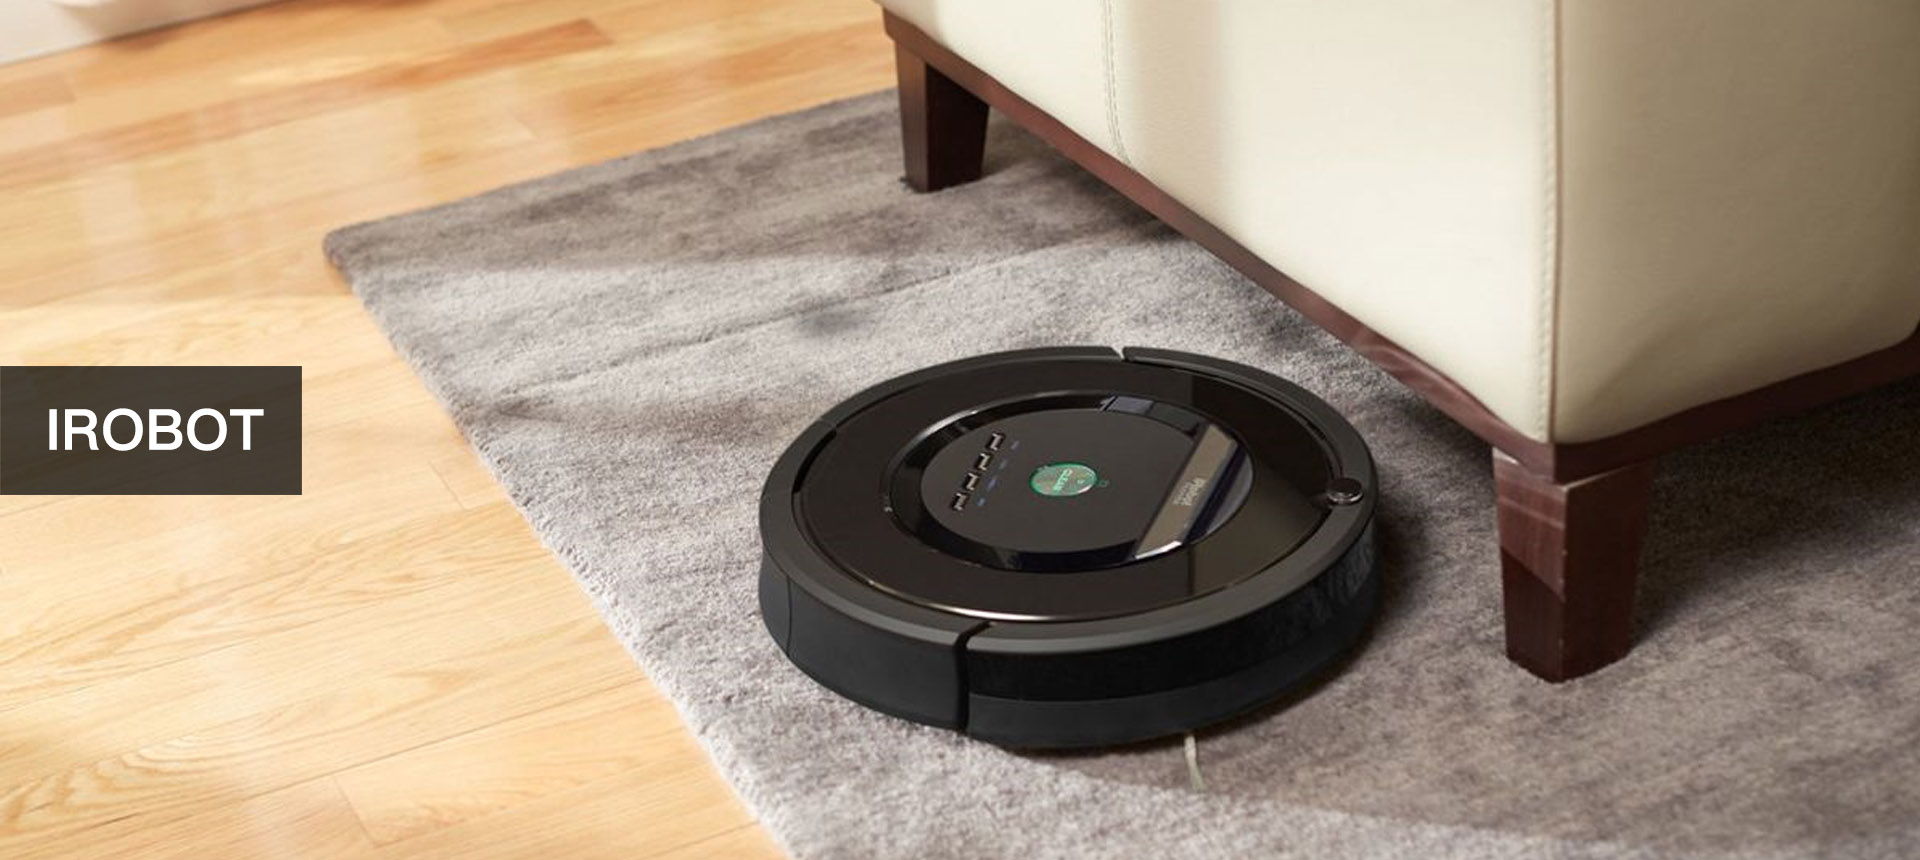 Irobot Robot Vacuum Reviews 2021 Which, Are Roombas Good For Hardwood Floors